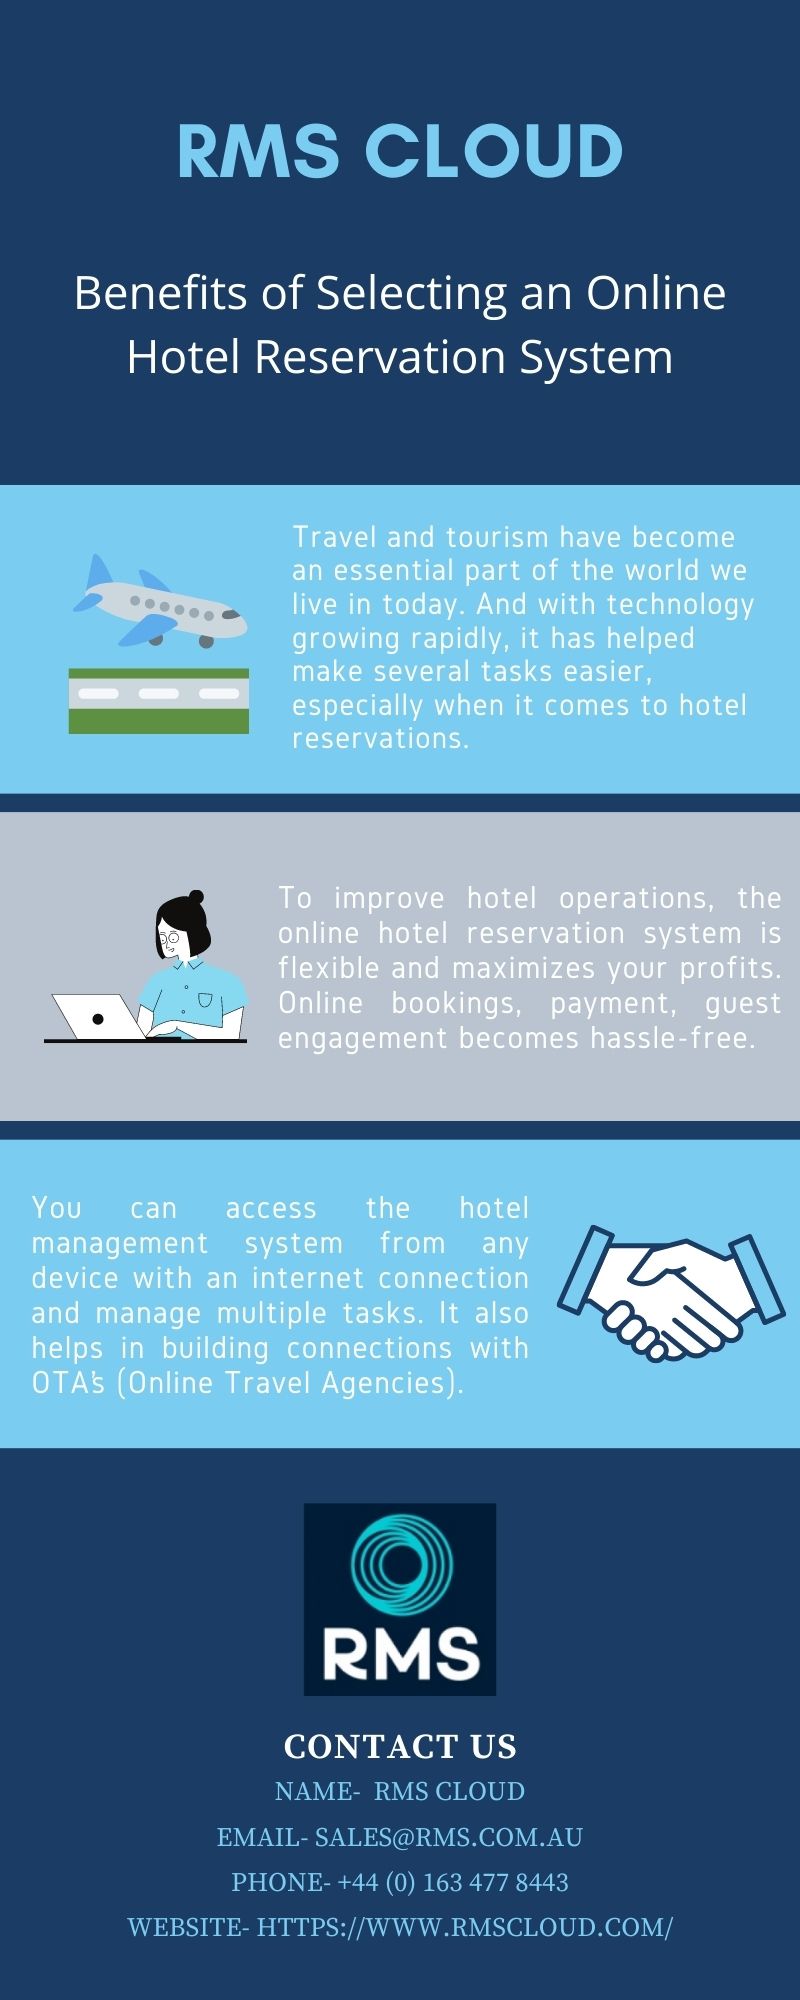 Benefits of Selecting an Online Hotel Reservation System